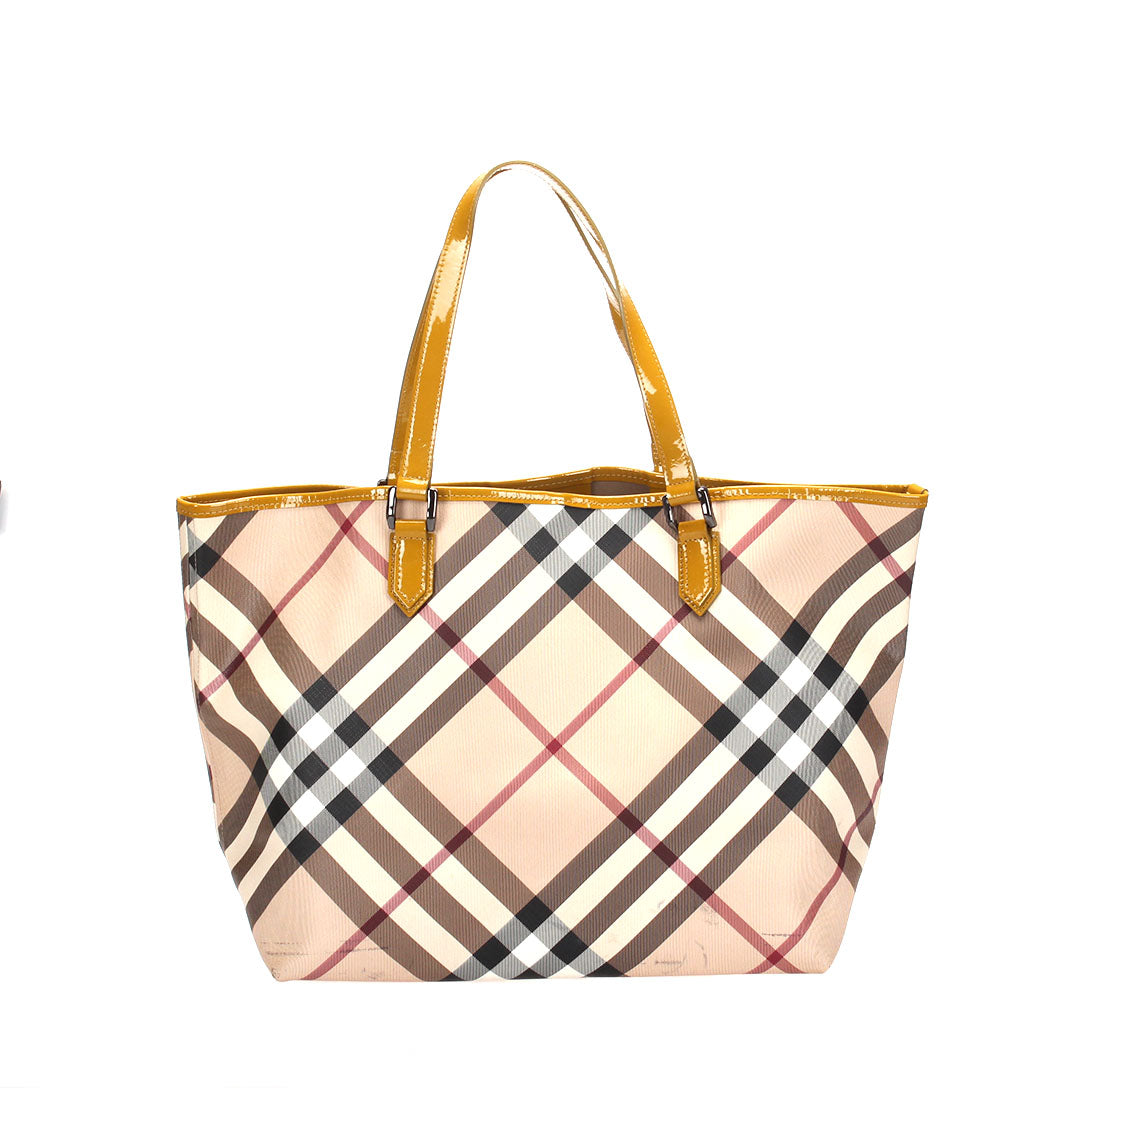 Burberry Tote Bag Pouch